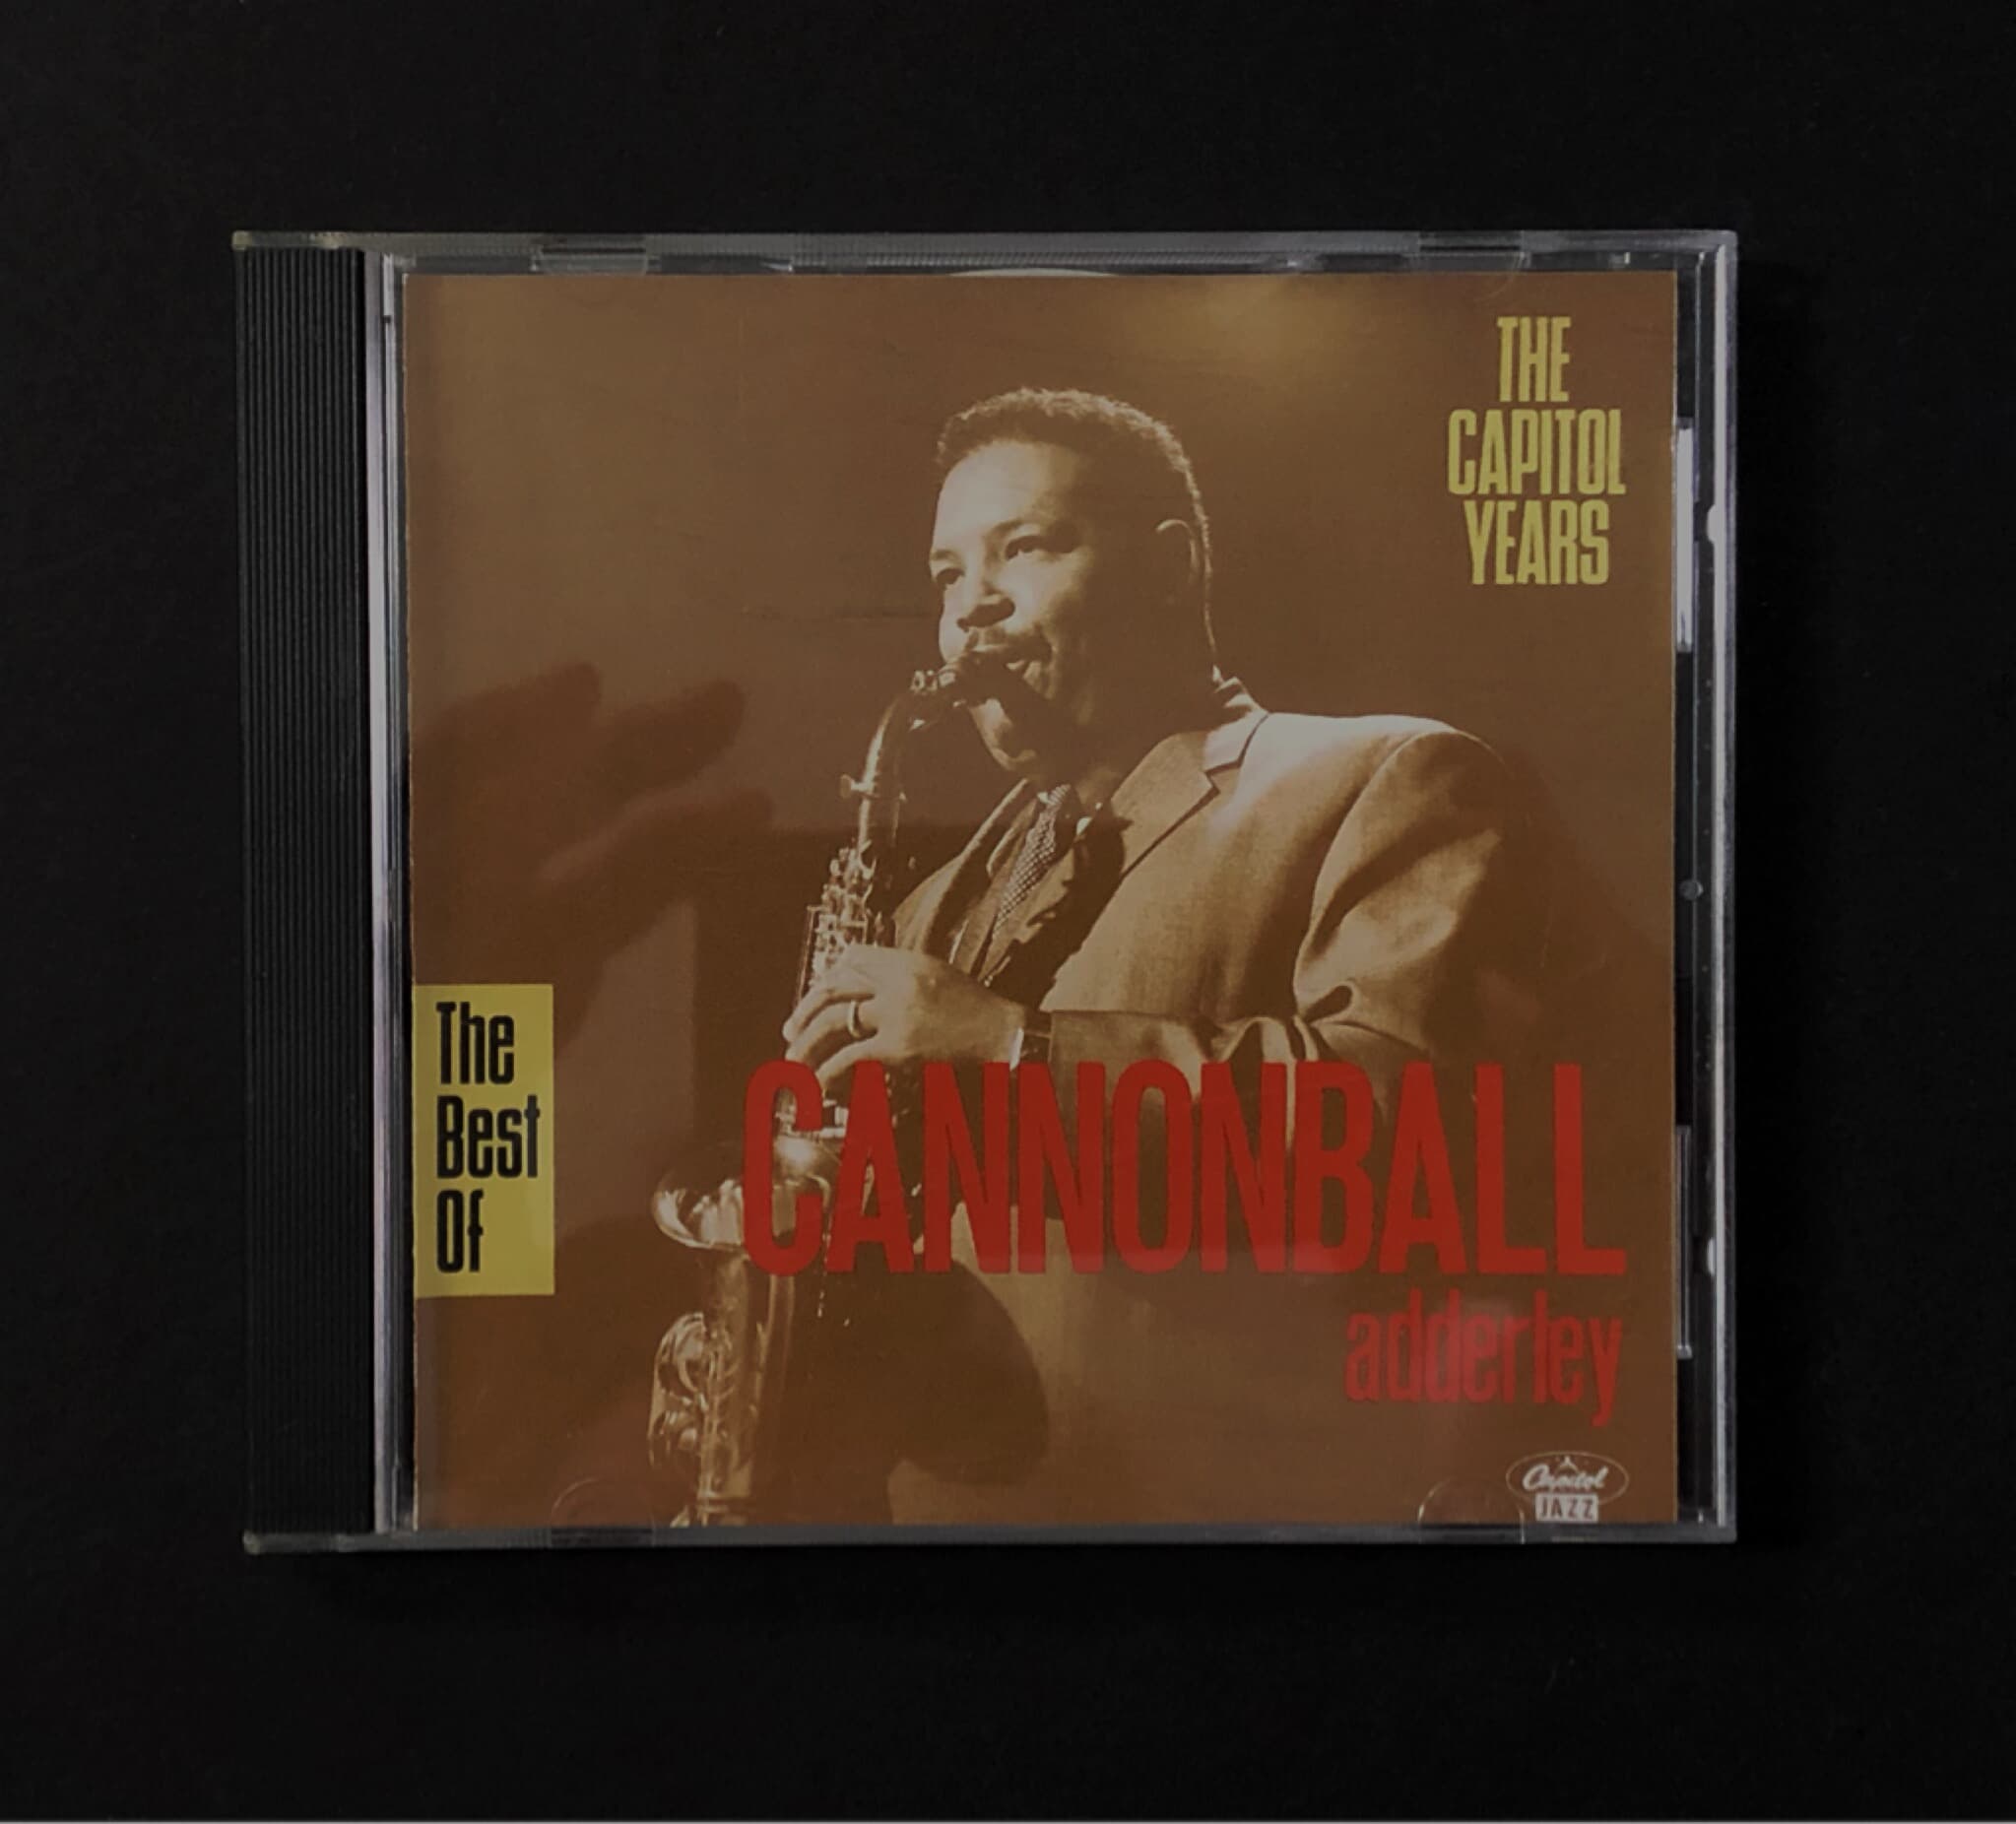 [CD]THE BEST OF CANNONBALL ADDERLEY (US발매)